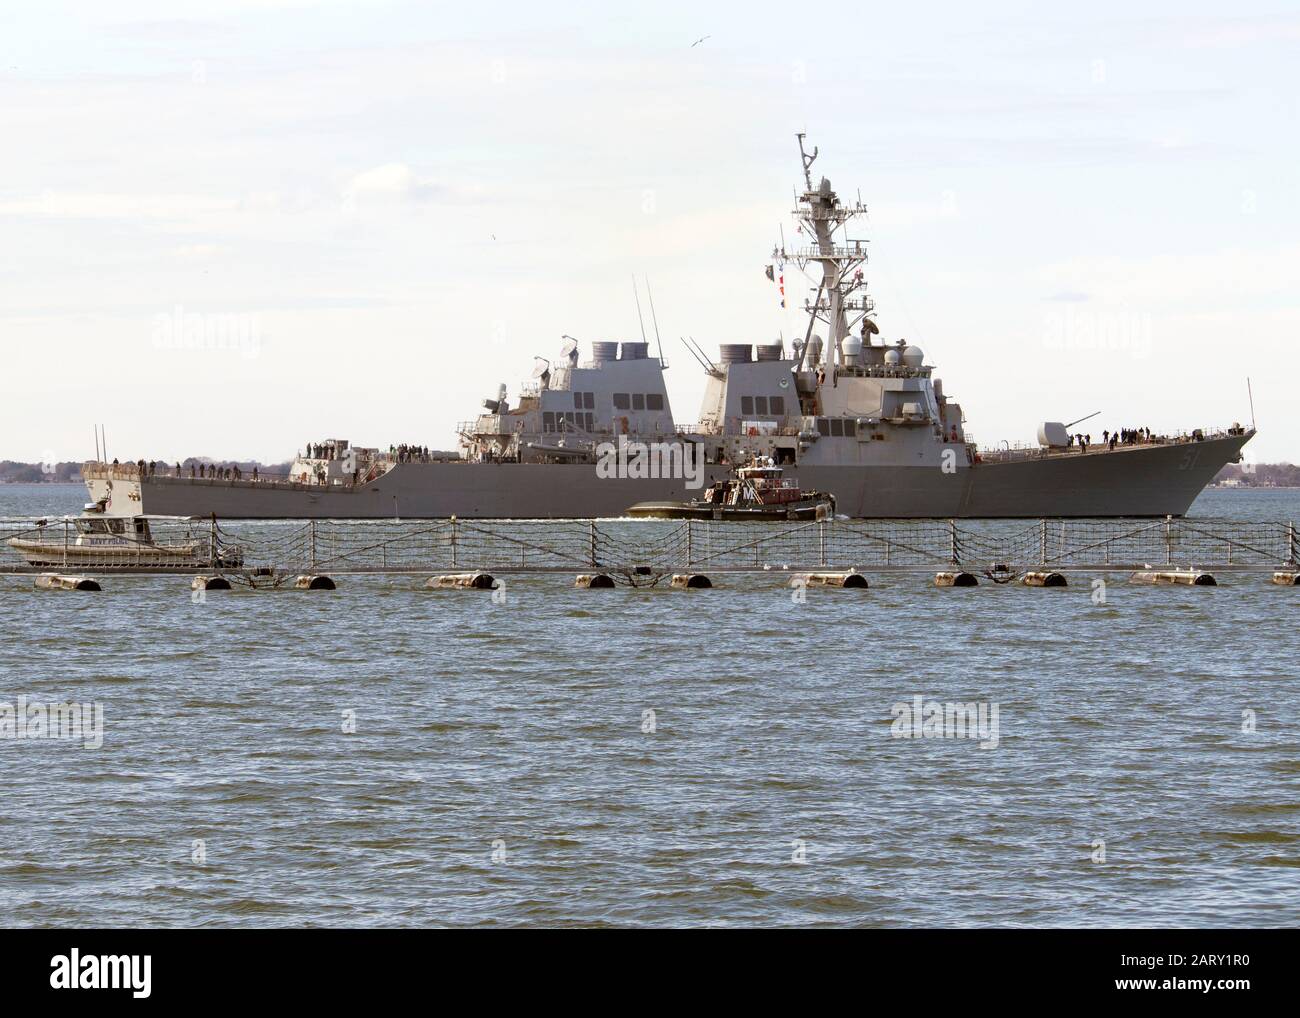 200128-N-KP445-1157 NORFOLK, Va. (Jan. 28, 2020) A tug boat escorts the guided missile destroyer USS Arleigh Burke (DDG 51) out to sea as the ship departs for sea trials. Arleigh Burke is in the final stage of its Dock Selected Restricted Availability (DSRA) conducted by NASSCO-General Dynamics. The Mid-Atlantic Regional Maintenance (MARMC) is providing oversight and management of the availability. (U.S. Navy Photo by Hendrick L. Dickson/Released) Stock Photo